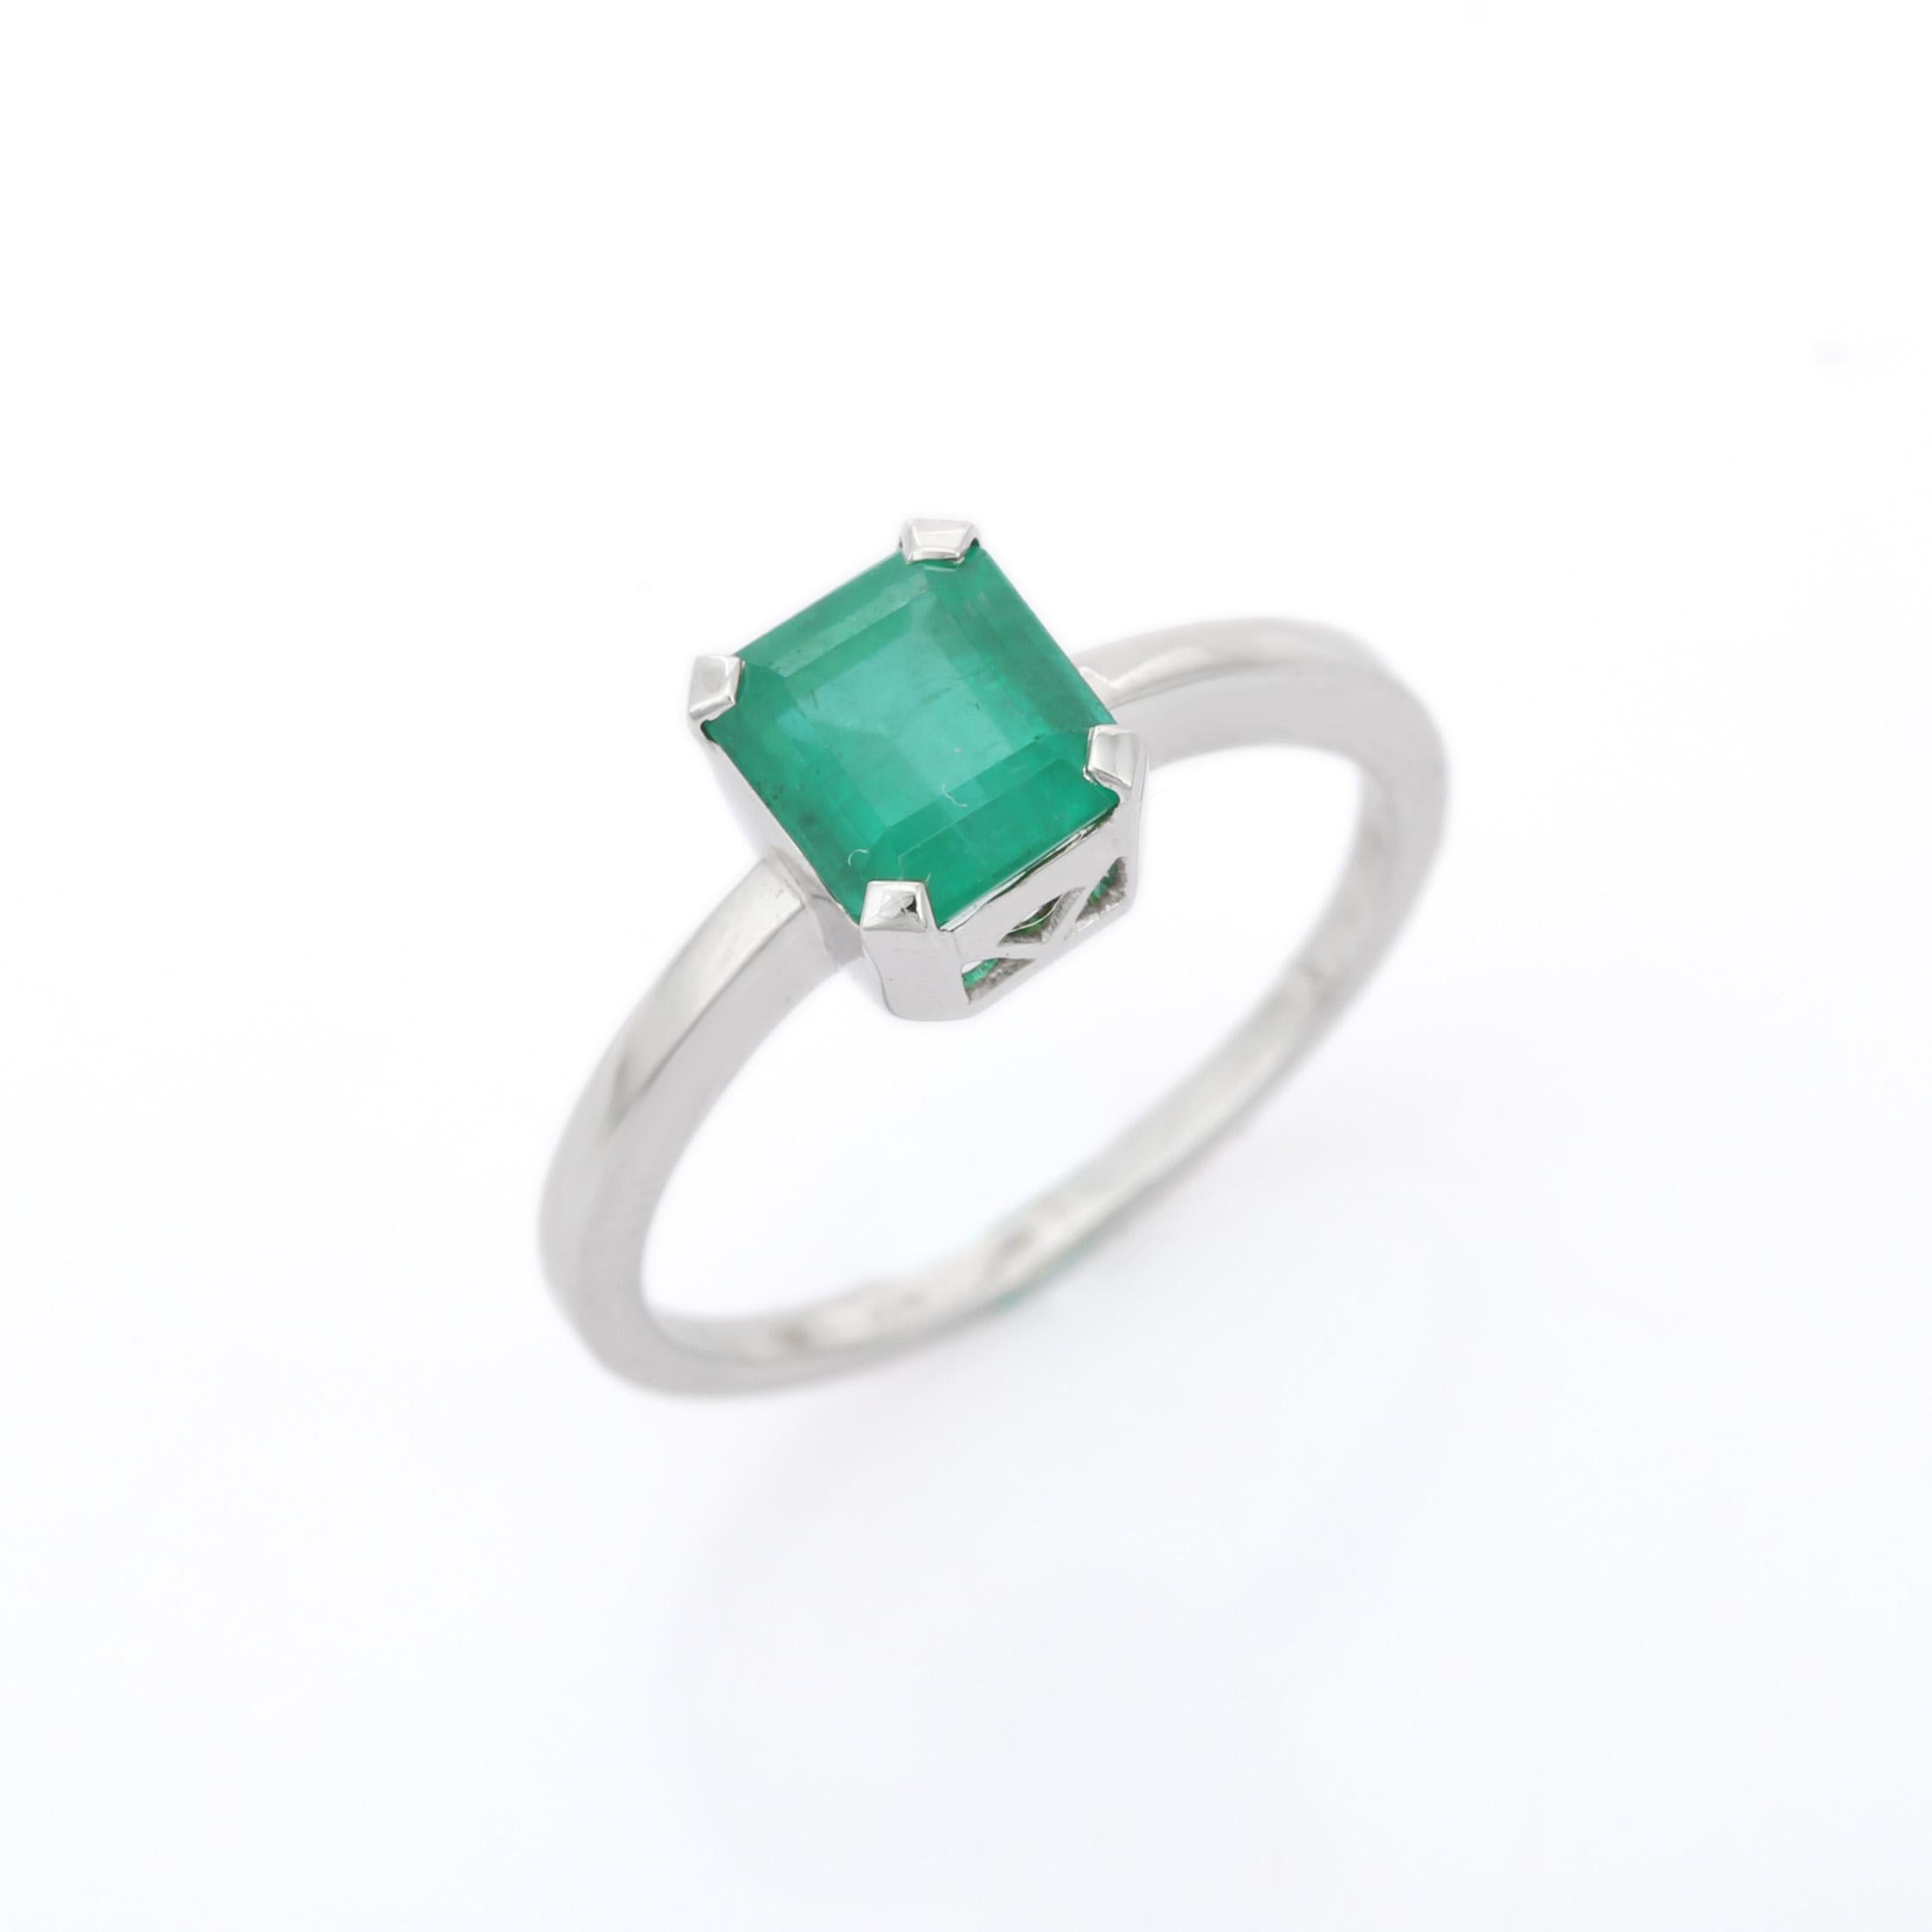 For Sale:  2.10 Carat Natural Octagon Cut Emerald 18K White Gold Ring 3